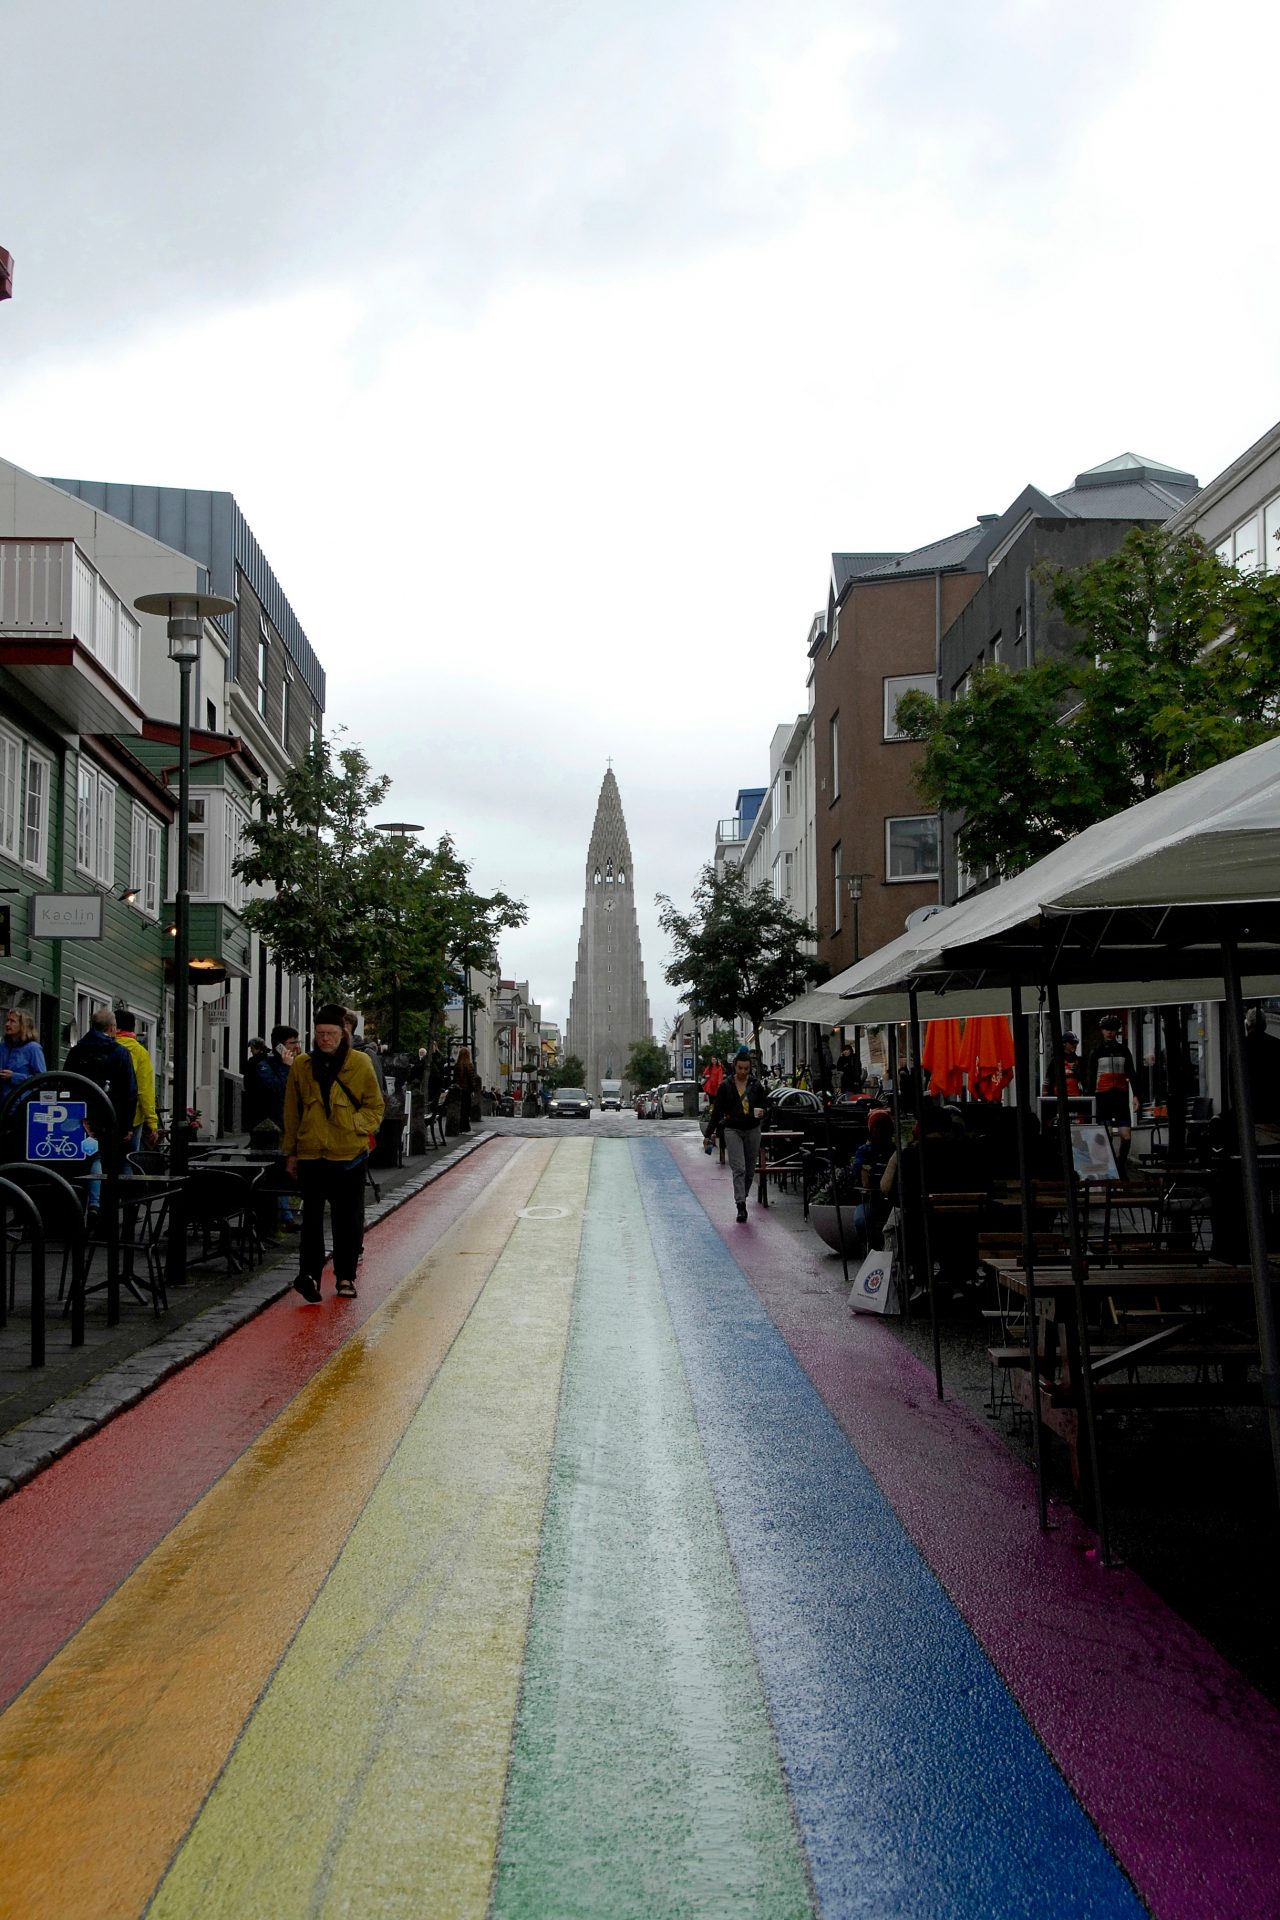 <p>We close the list of the highest-ranking countries with a trio in the north of Europe that also got 10 points. In Iceland, we see the first rainbow street in the world in this photo. Norwegians are equally liberal when it comes to gender identity and sexuality, scoring a 10 like their neighbors. Finally, Denmark is considered a highly tolerant country, although the Spartacus Index does note that parts of its society advocate conversion therapy - aka, a therapy believed to 'cure' homosexuality.</p>